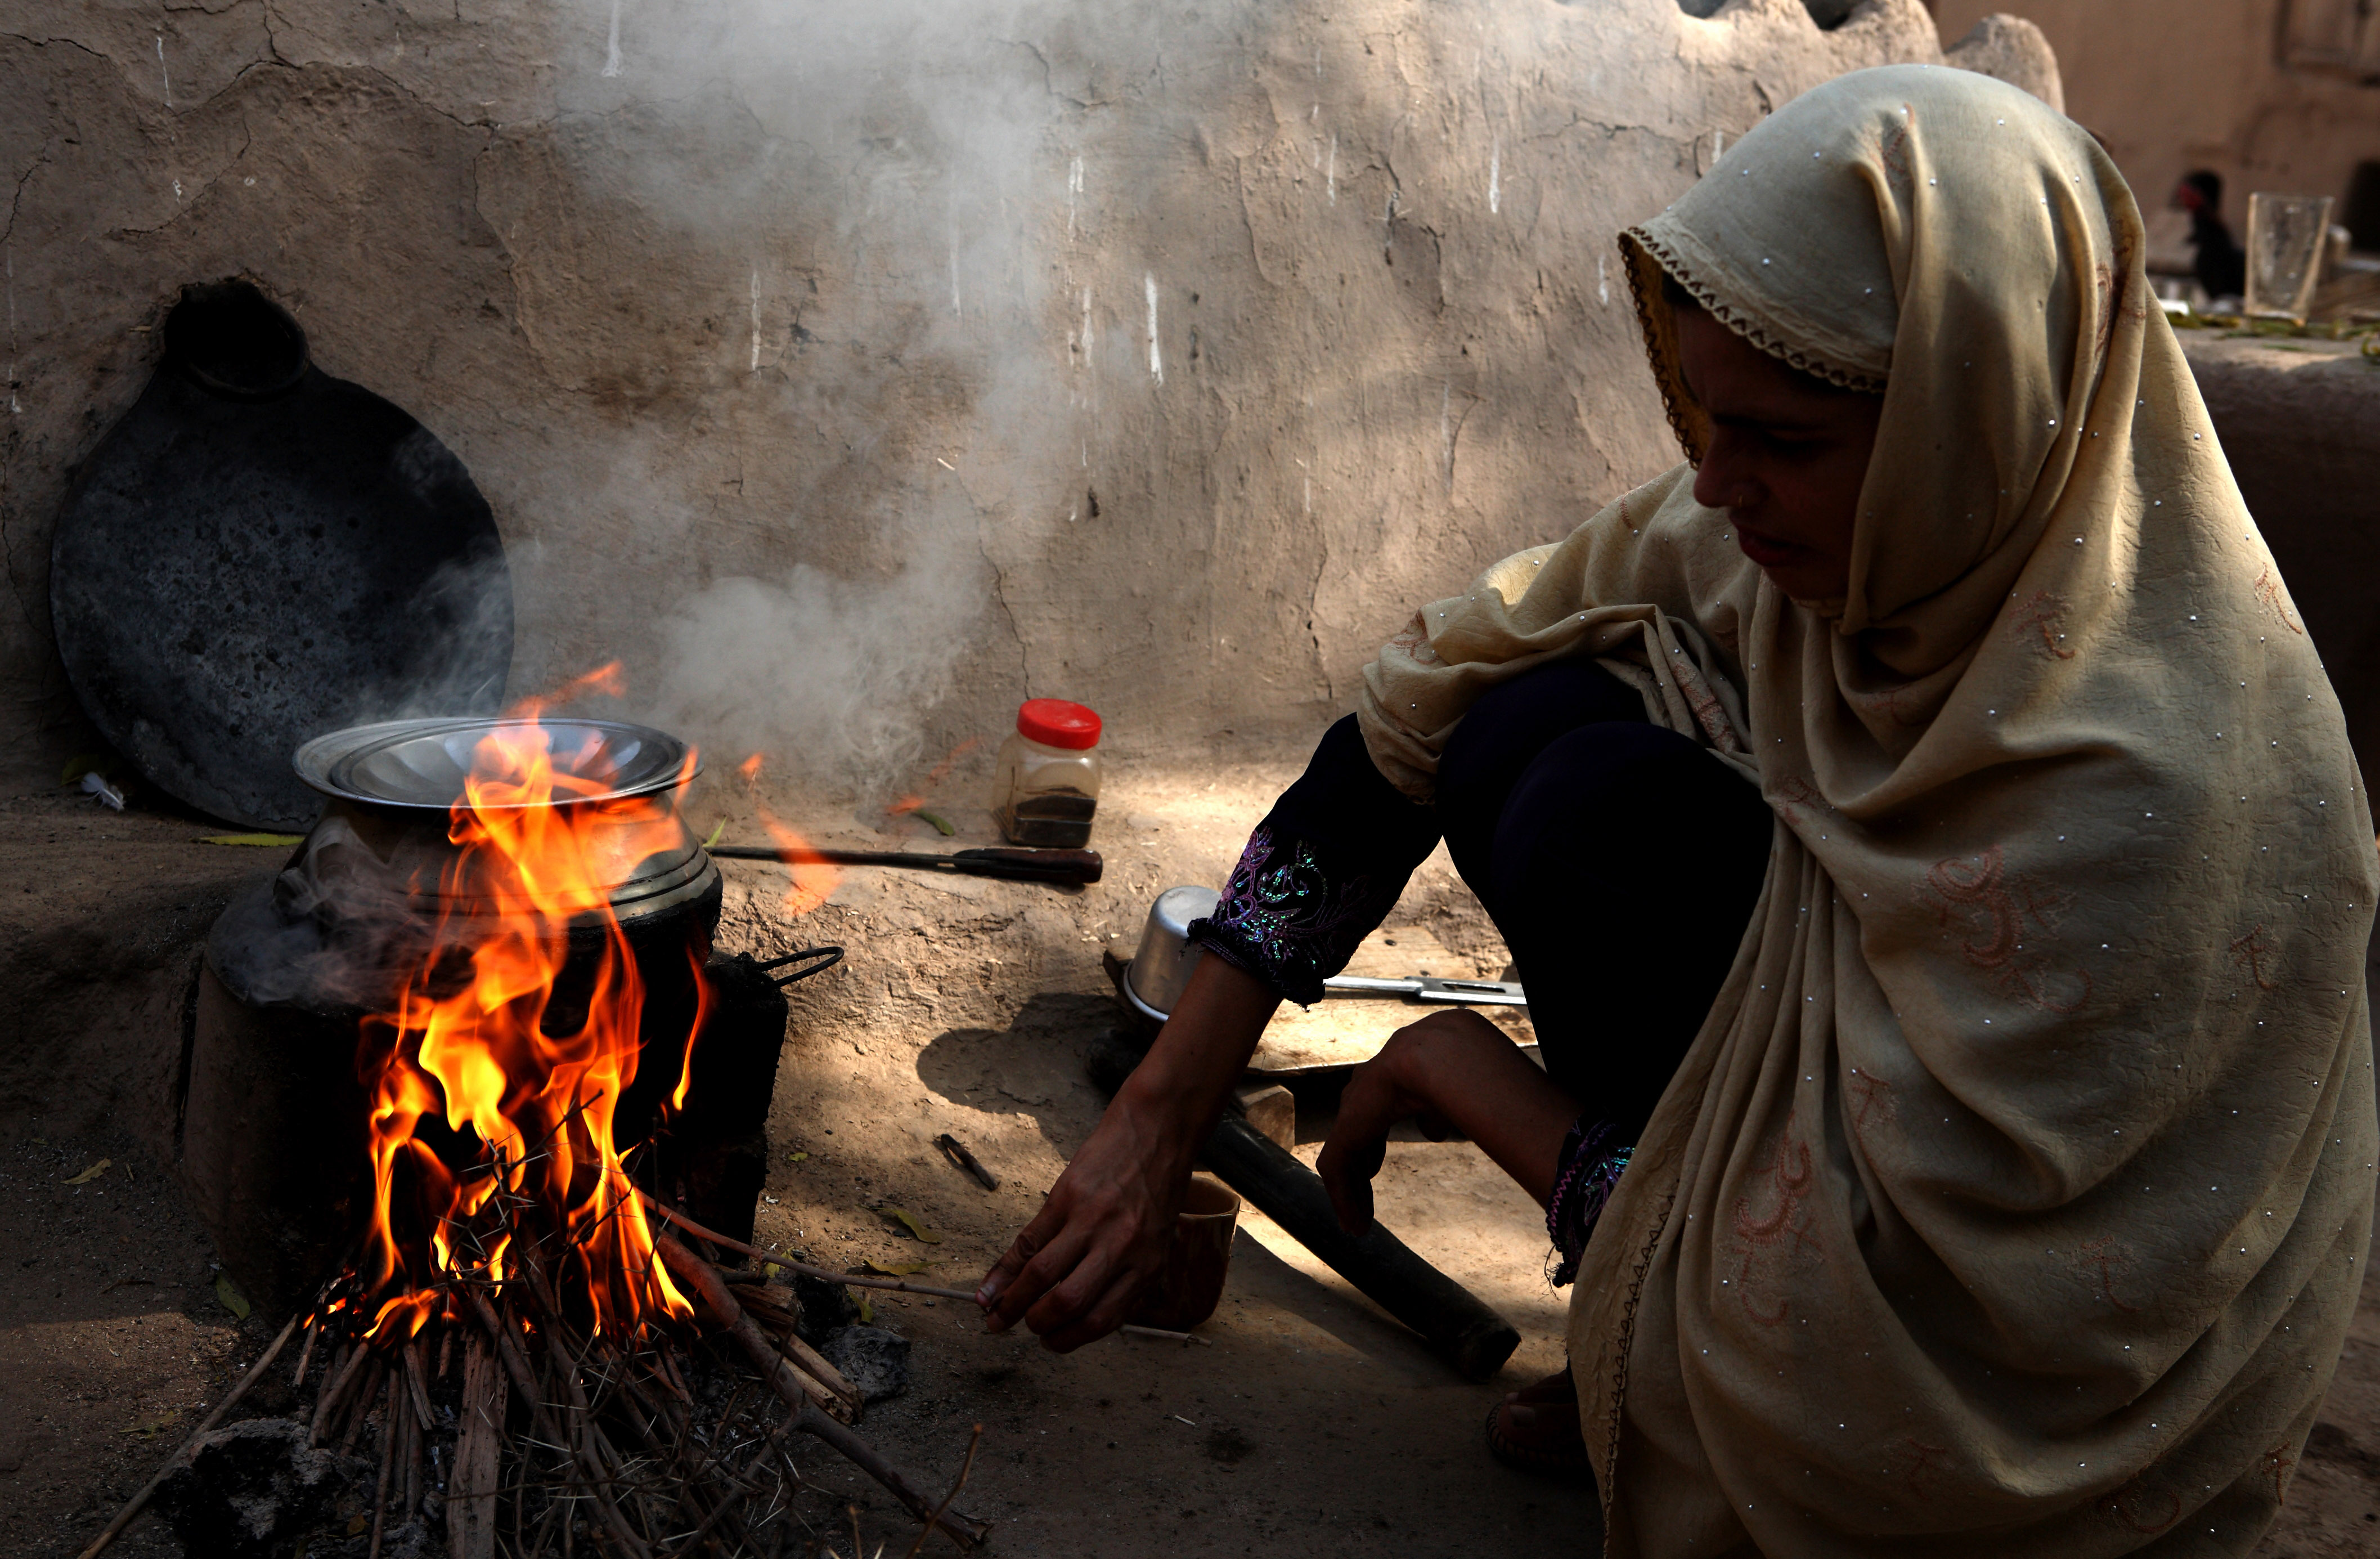 A woman cooking on an open fire